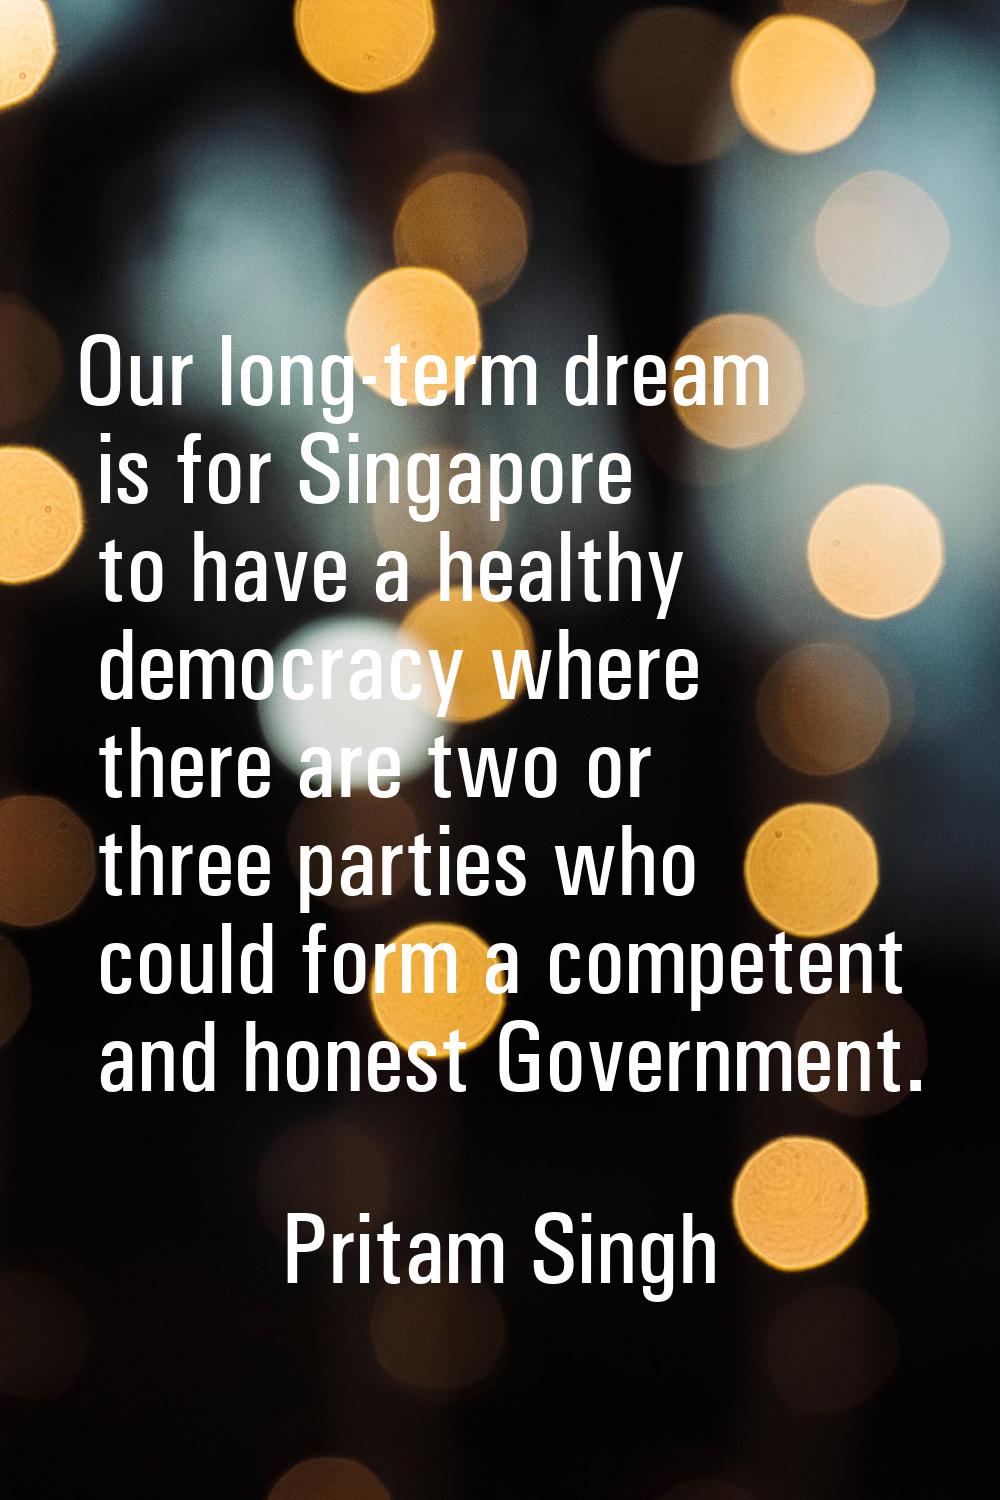 Our long-term dream is for Singapore to have a healthy democracy where there are two or three parti